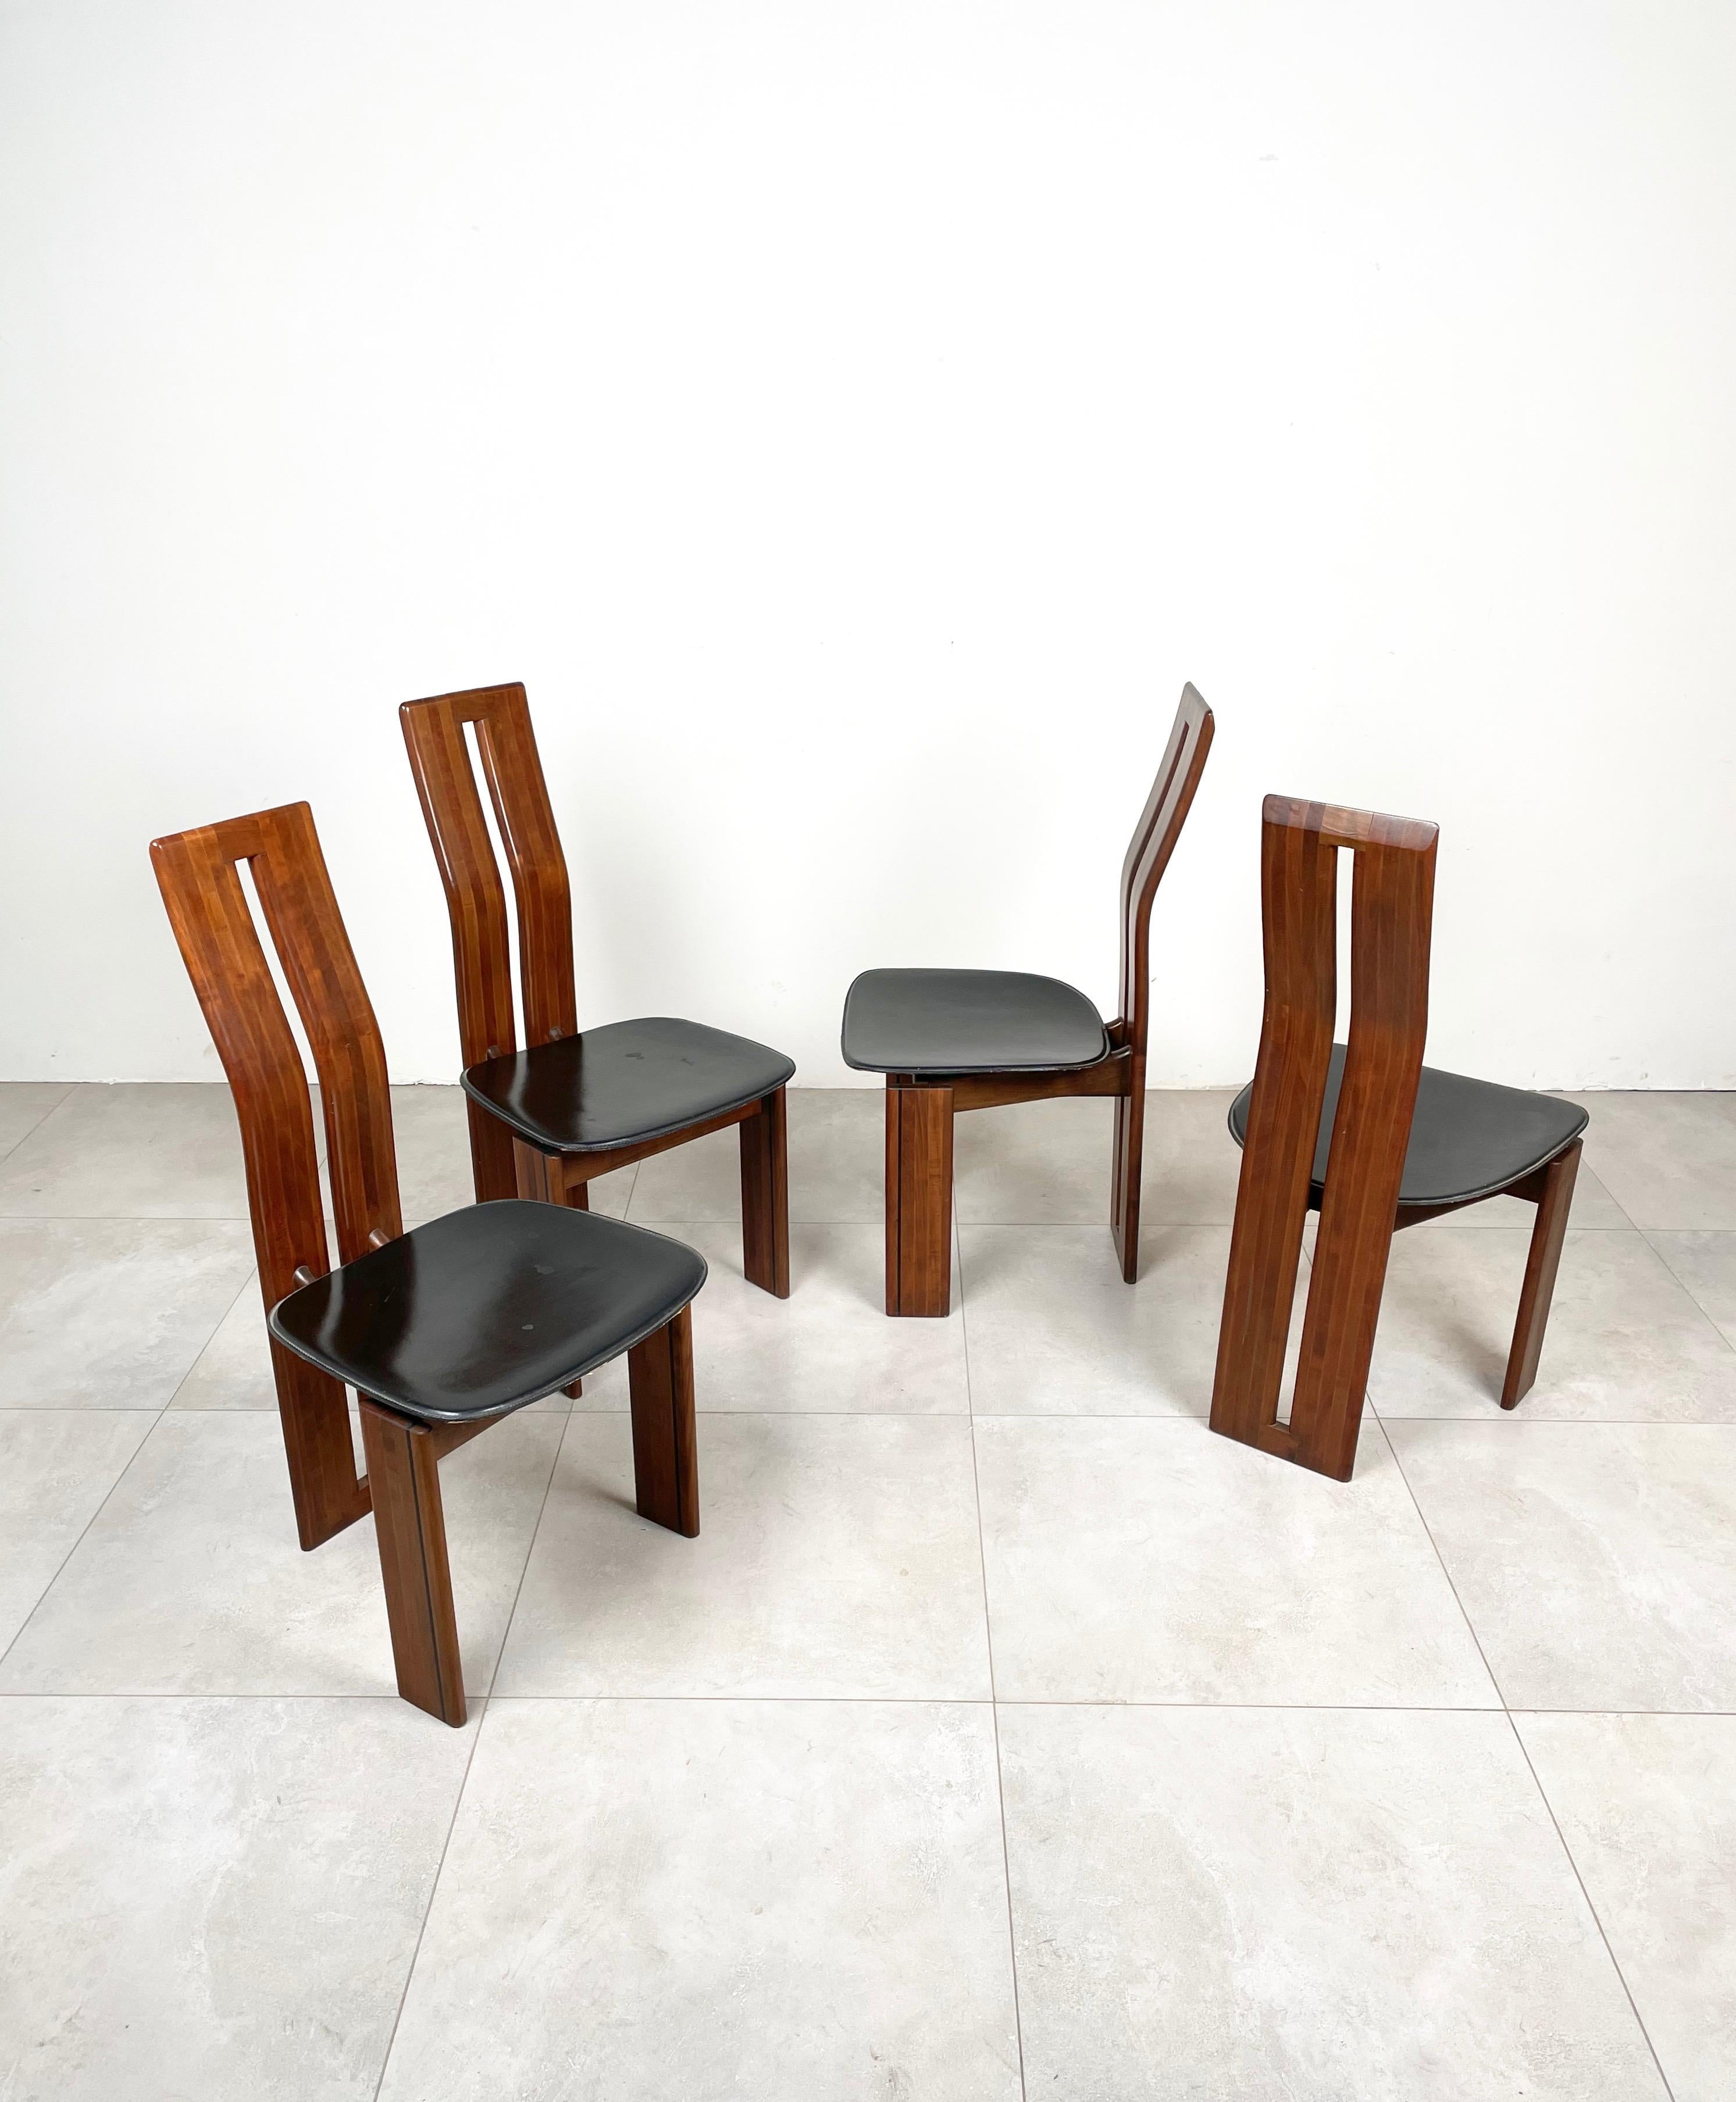 Late 20th Century Set of Four Chairs Wood and Leather Mario Marenco for Mobil Girgi, Italy 1970s For Sale